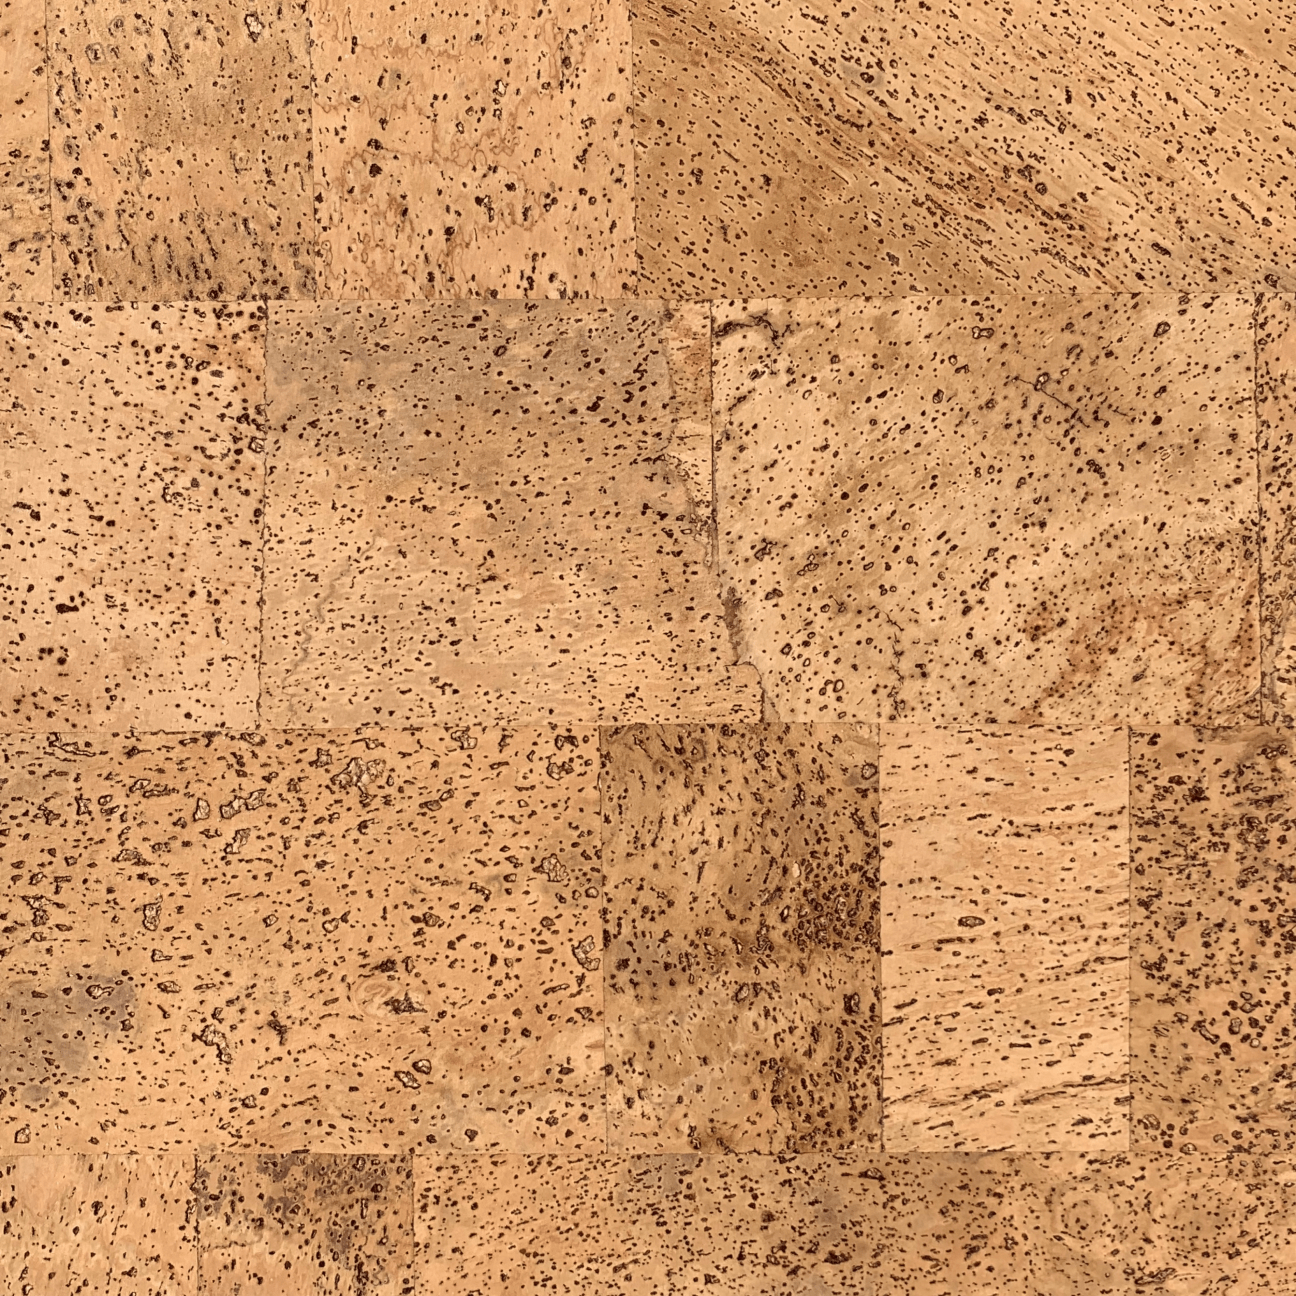 Harmony Pattern: An arrangement of cork slices made to create a patchwork of warm cork tones in a subtle design.